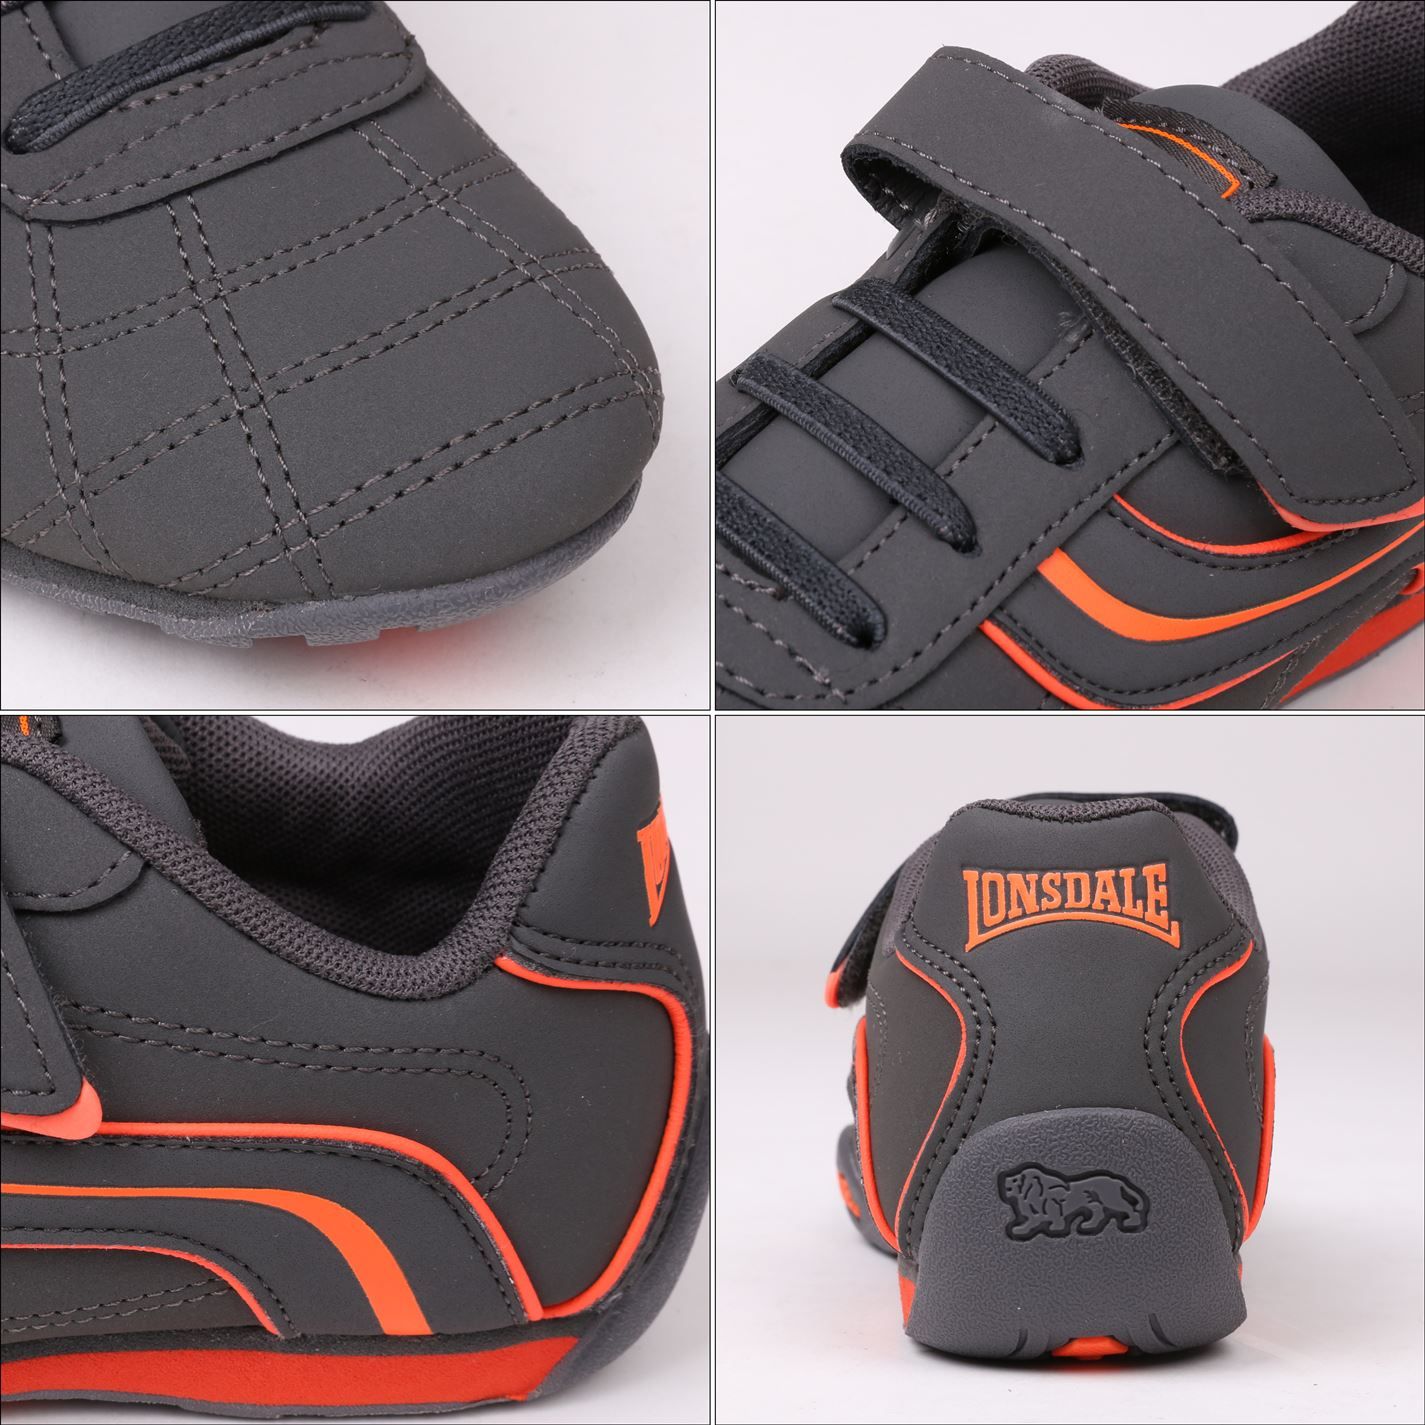 Lonsdale Kids Camden Child Boys Trainers Lace Up Casual Sports Shoes Footwear